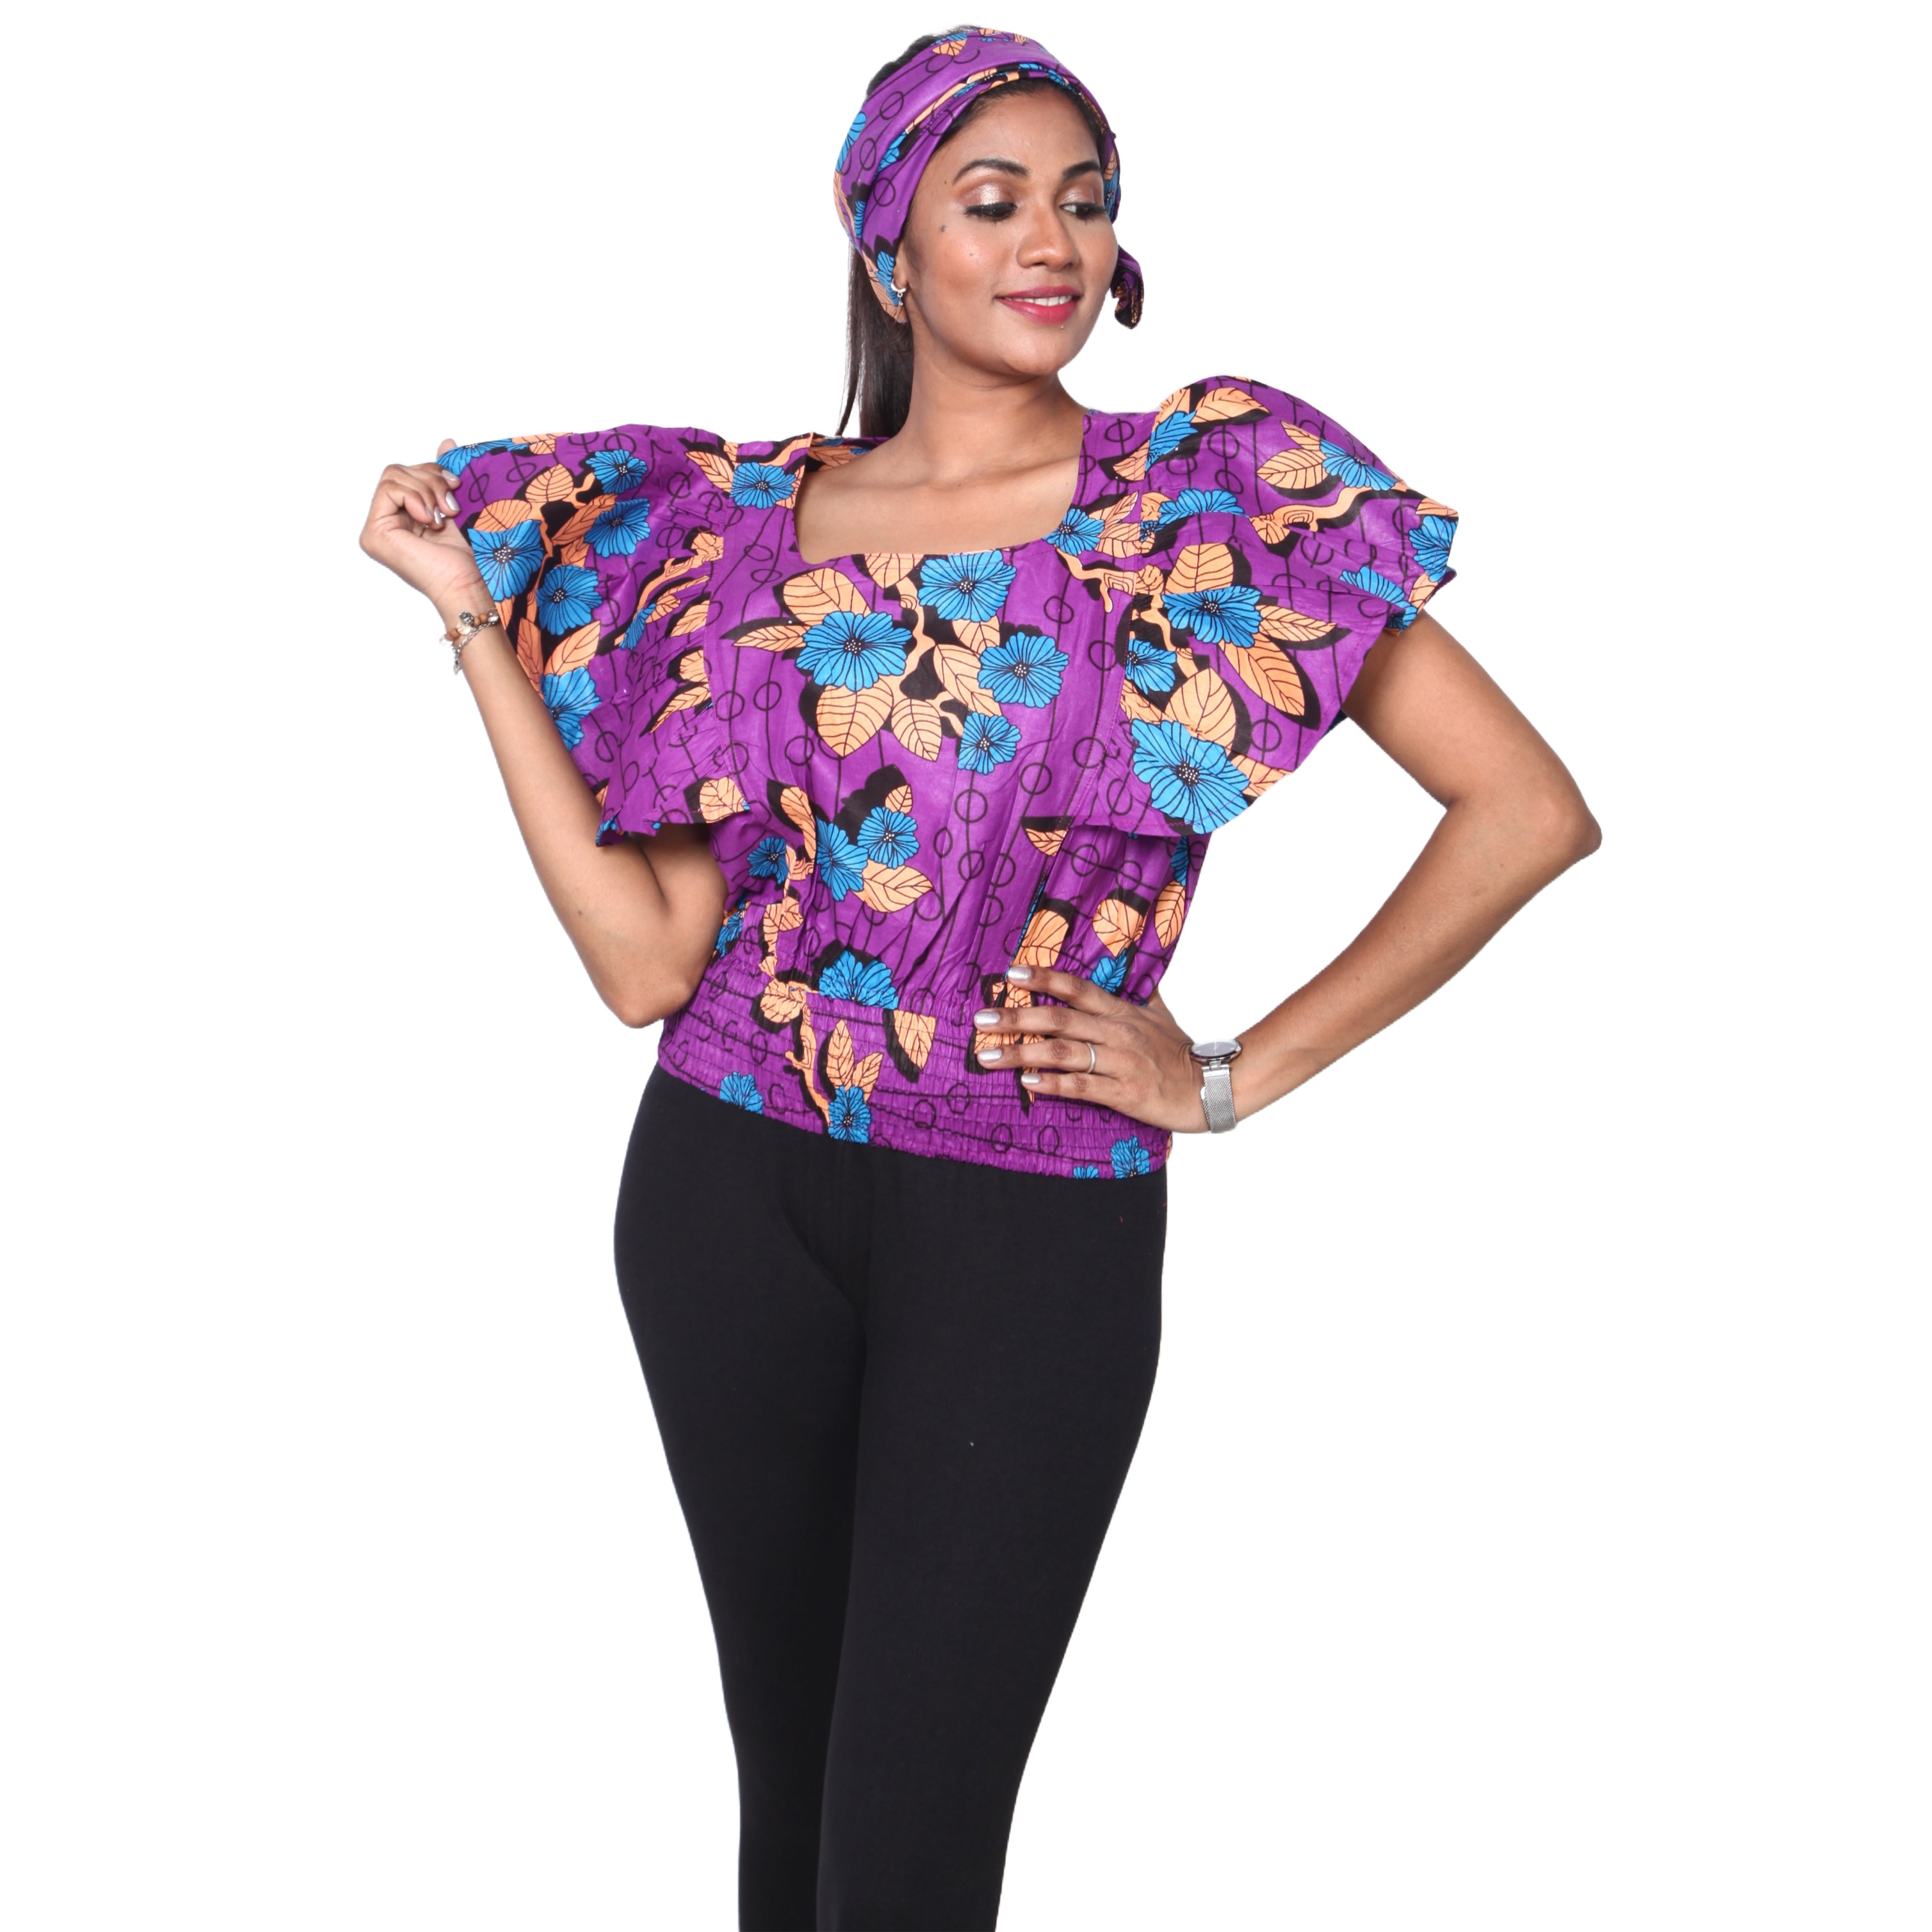 Women's African Print Short Sleeve Top purple , blue and pail yellow